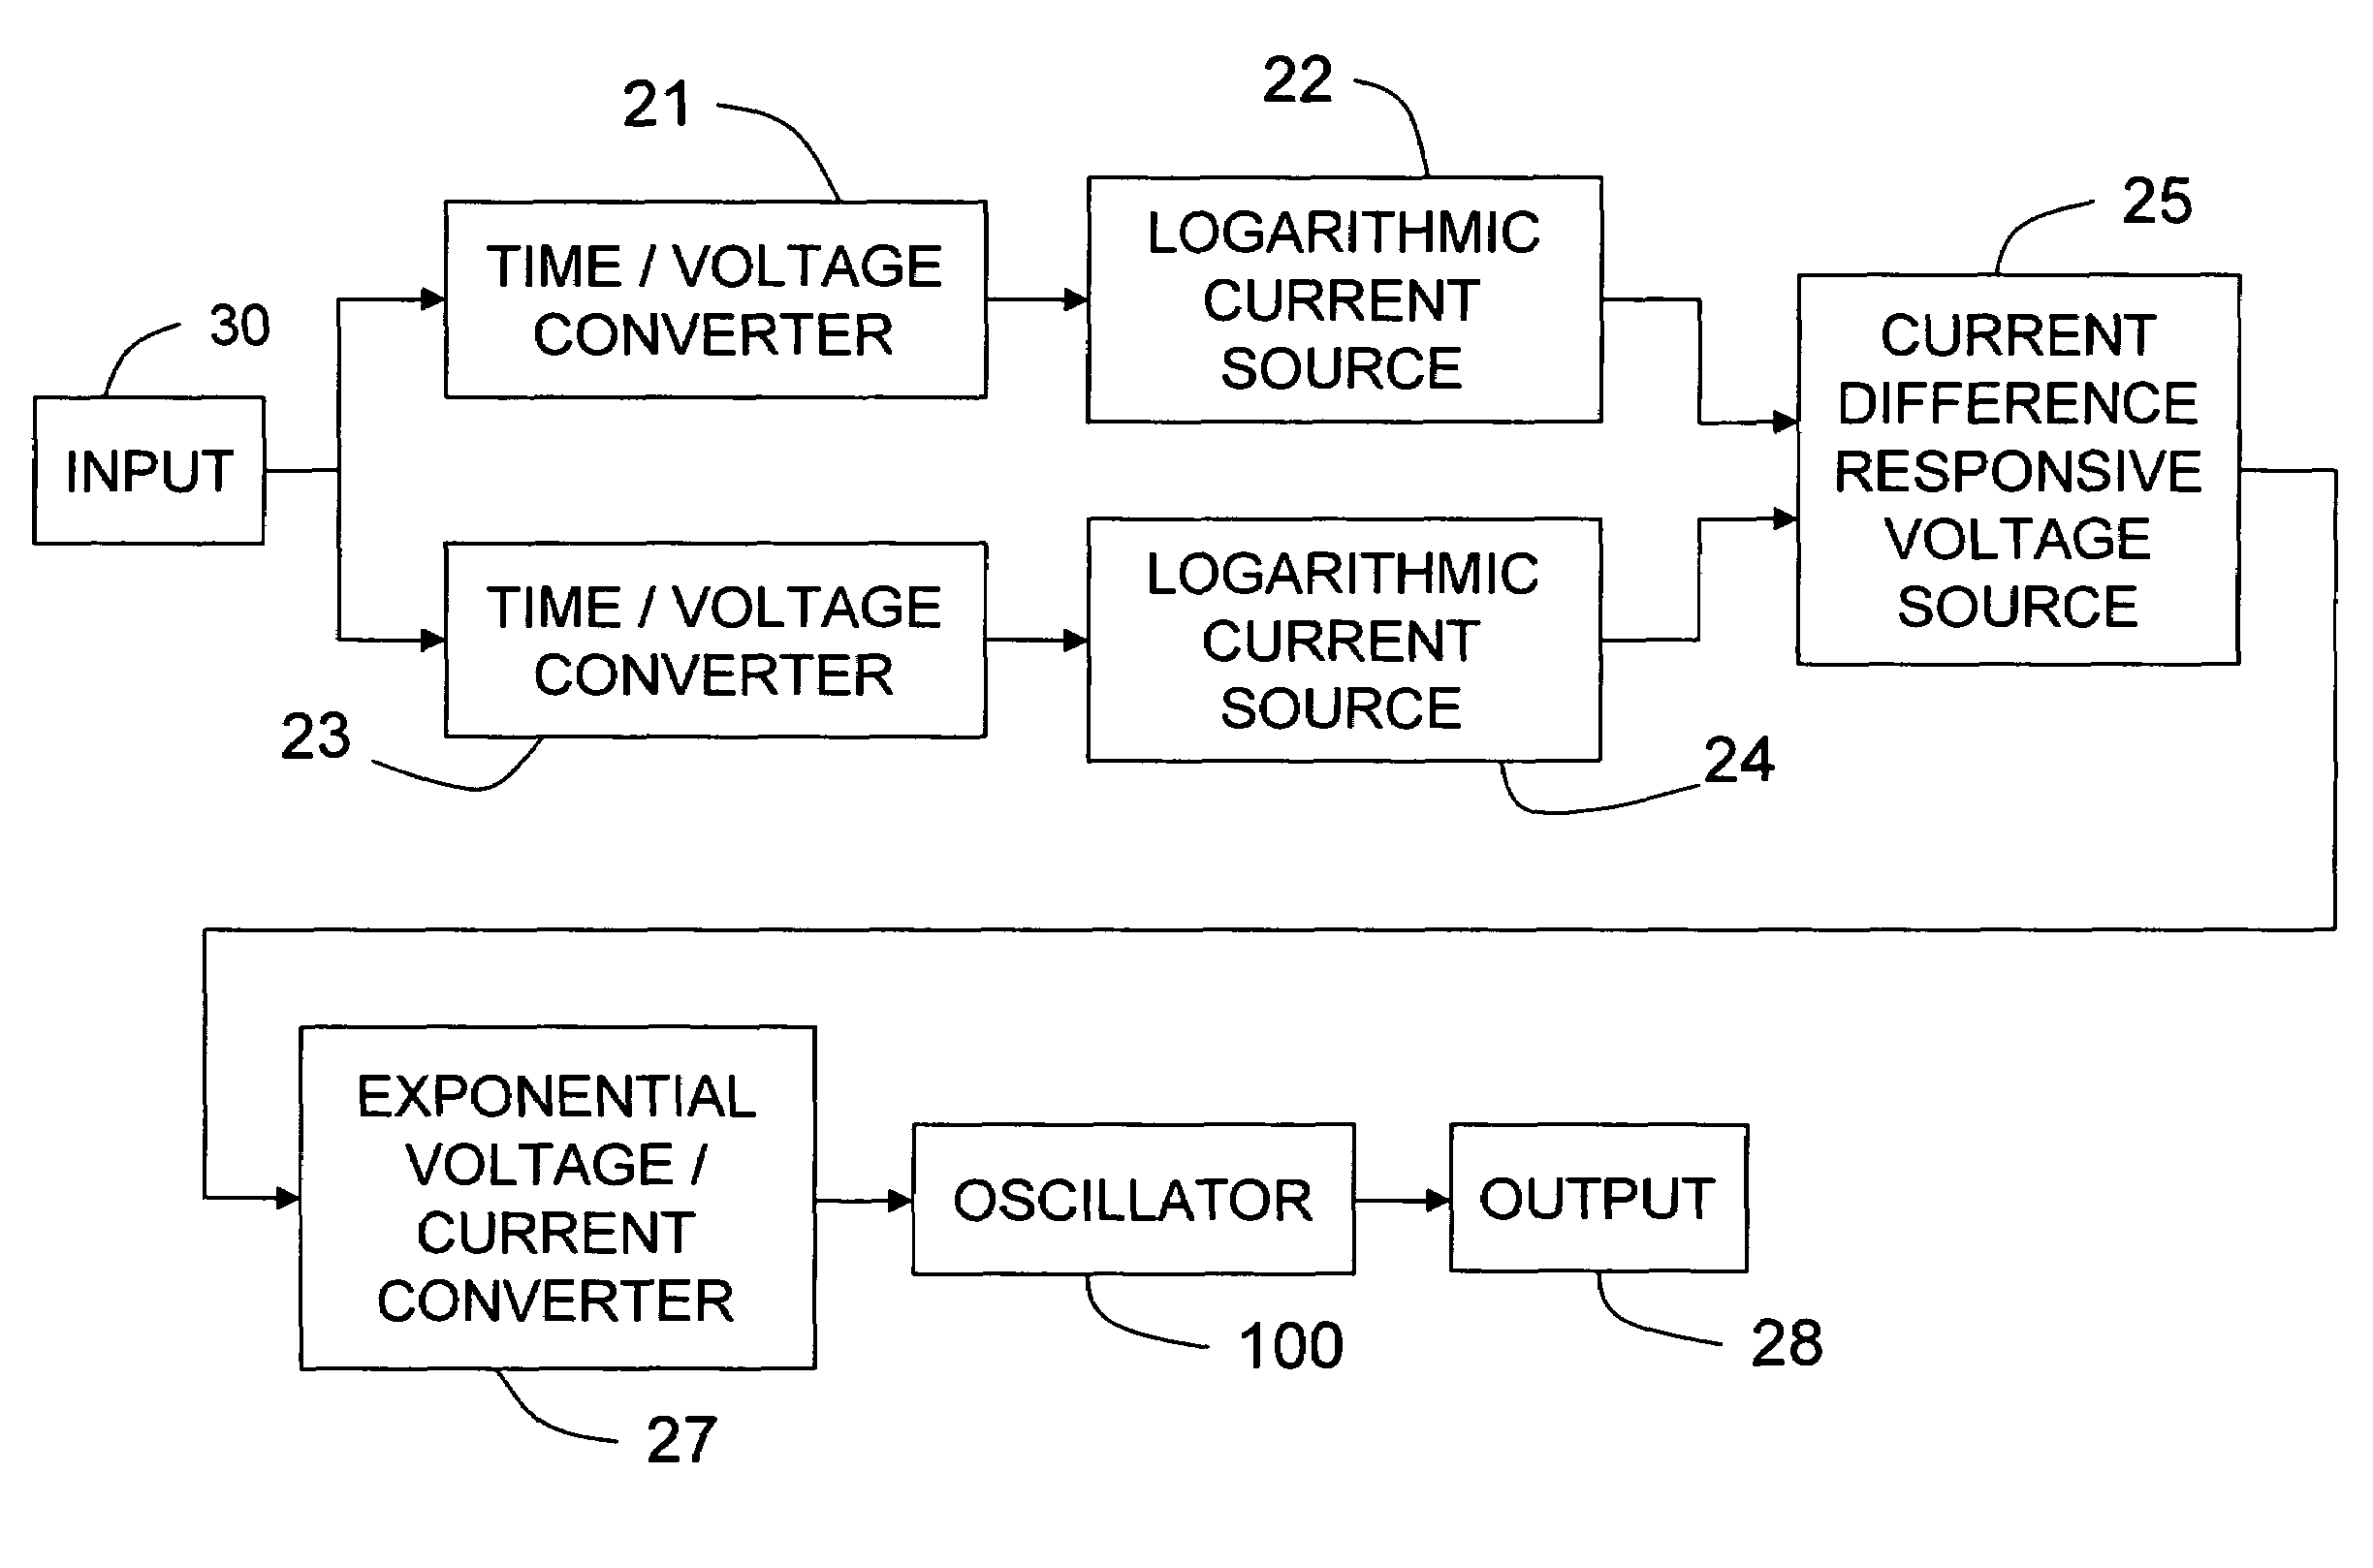 Analog duty cycle replicating frequency converter for PWM signals